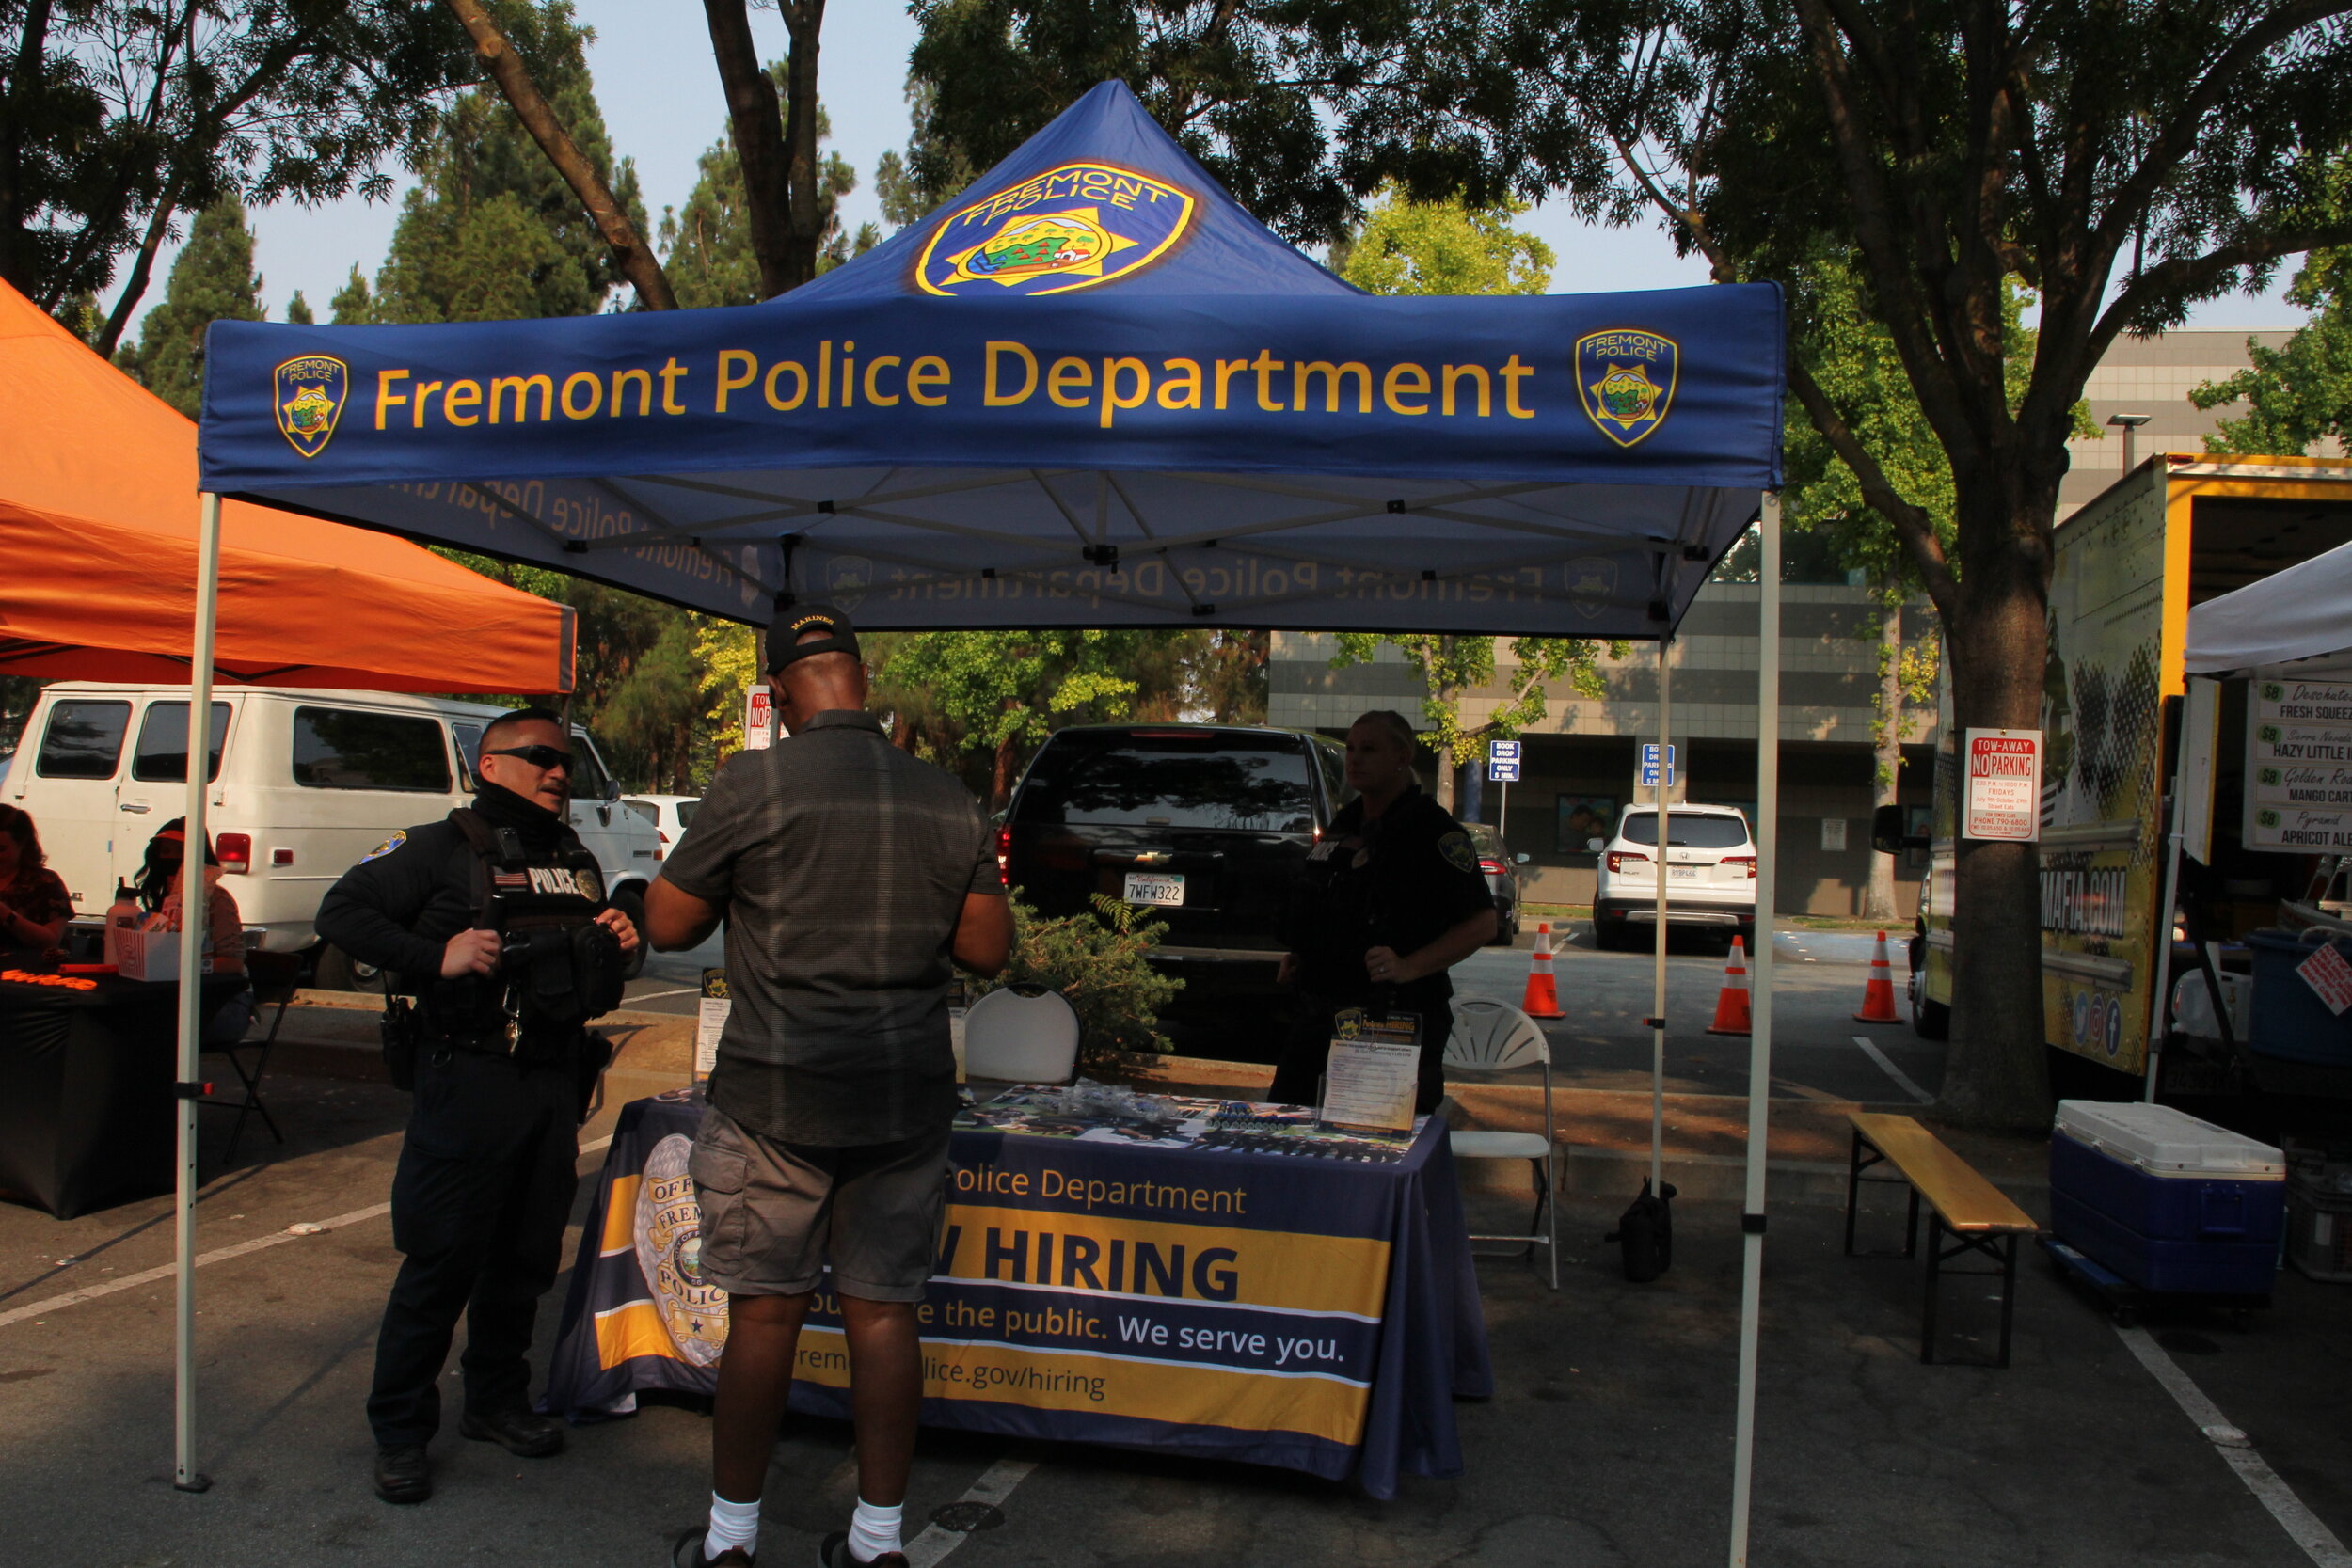 Fremont PD booth IMG_7333.JPG